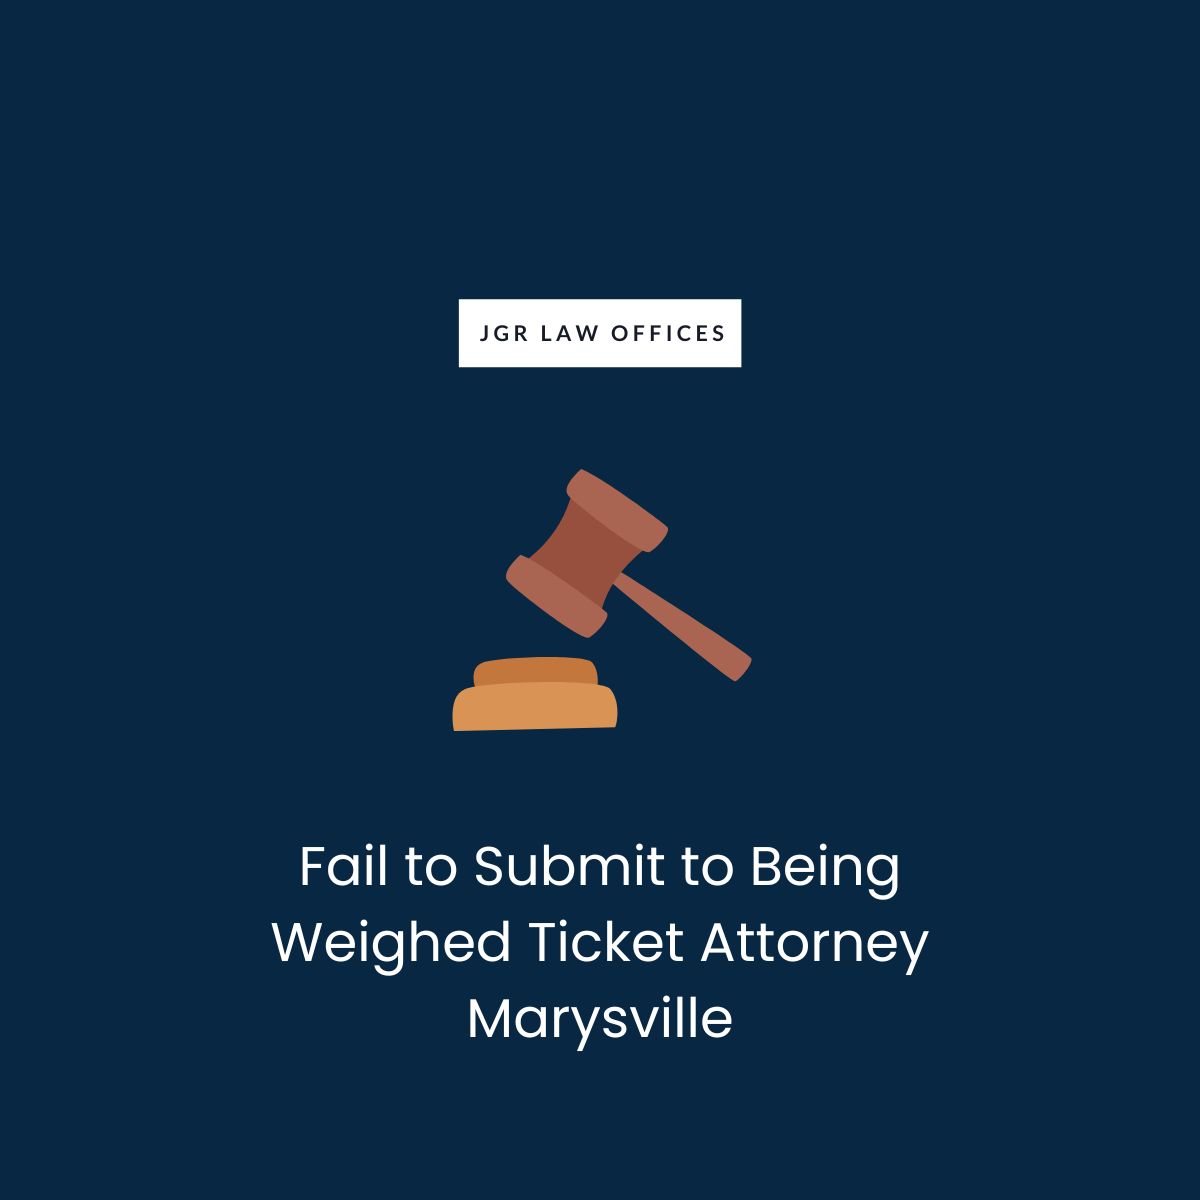 Fail to Submit to Being Weighed Ticket Attorney Marysville